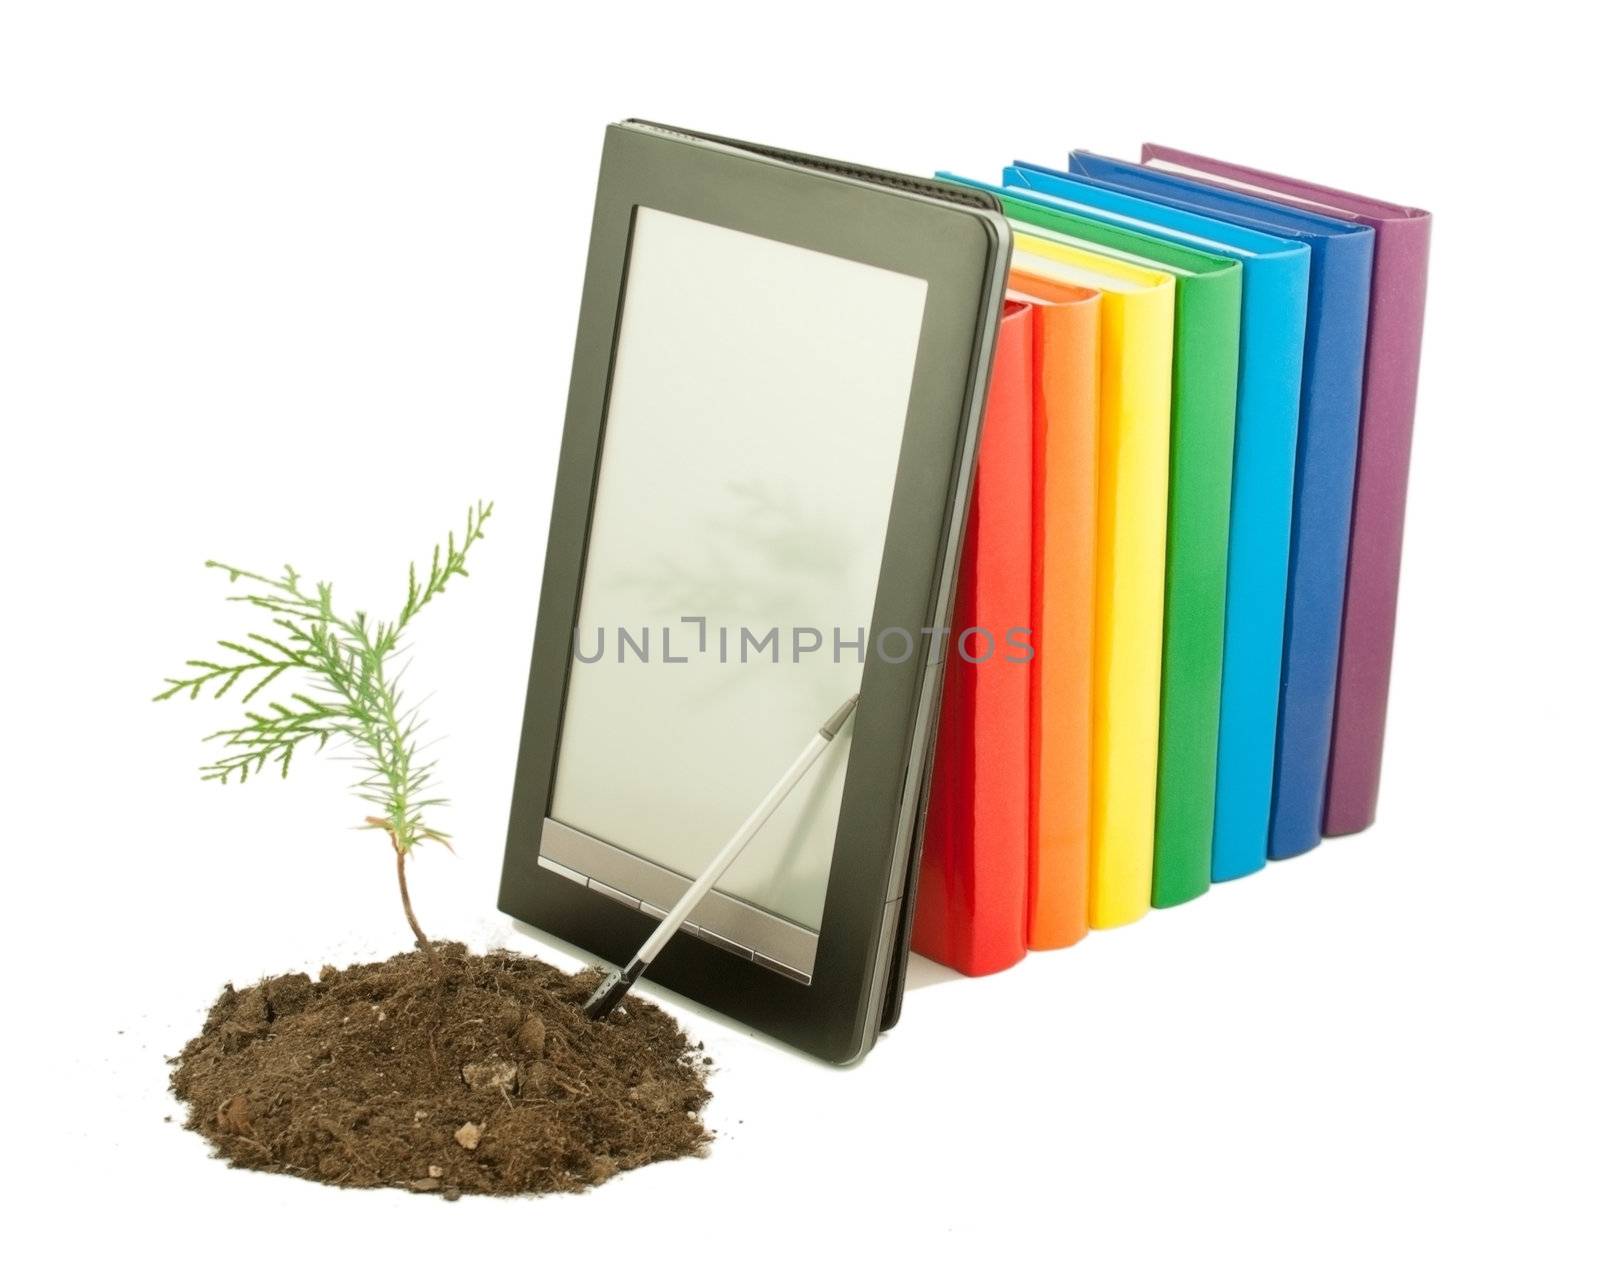 Tree seedling with row of books and electronic book reader behind isolated on white